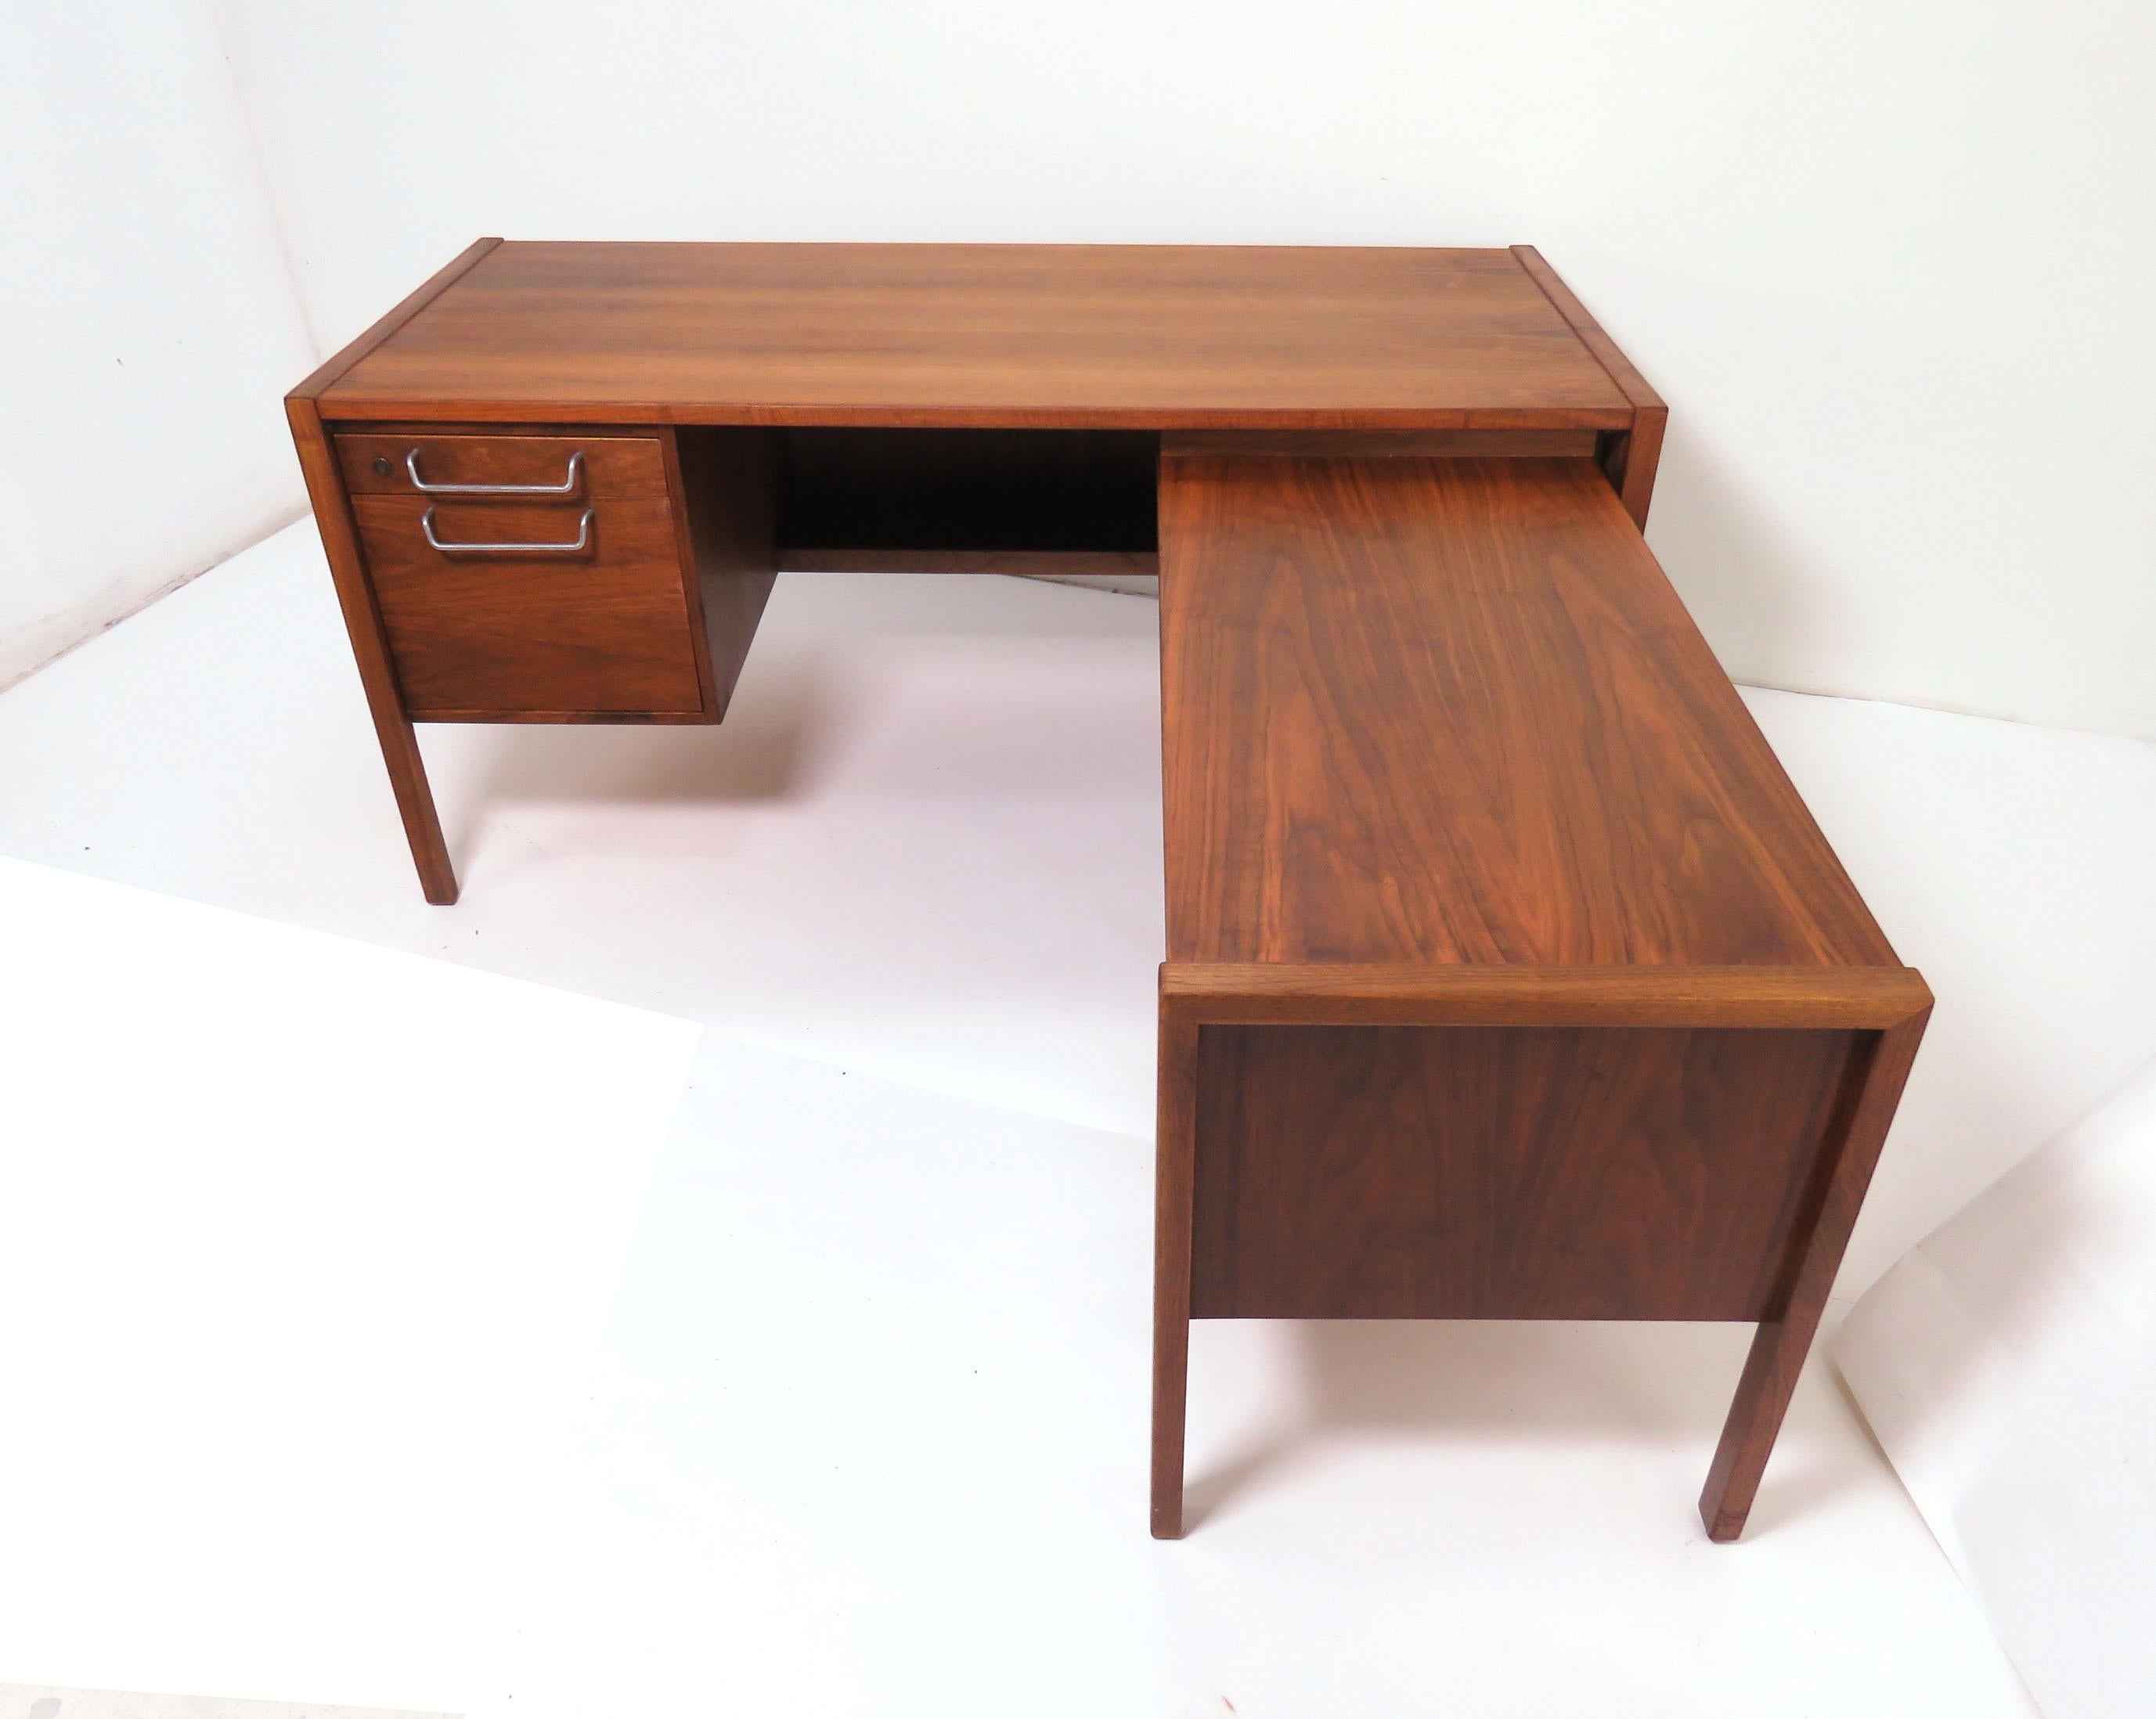 Large Mid-Century Modern executive desk in walnut by Jens Risom, circa 1960s, bank of drawers on the left include a pencil organizer and a deep drawer for hanging files. Desk includes an optional (removable) return with under shelf that mounts to